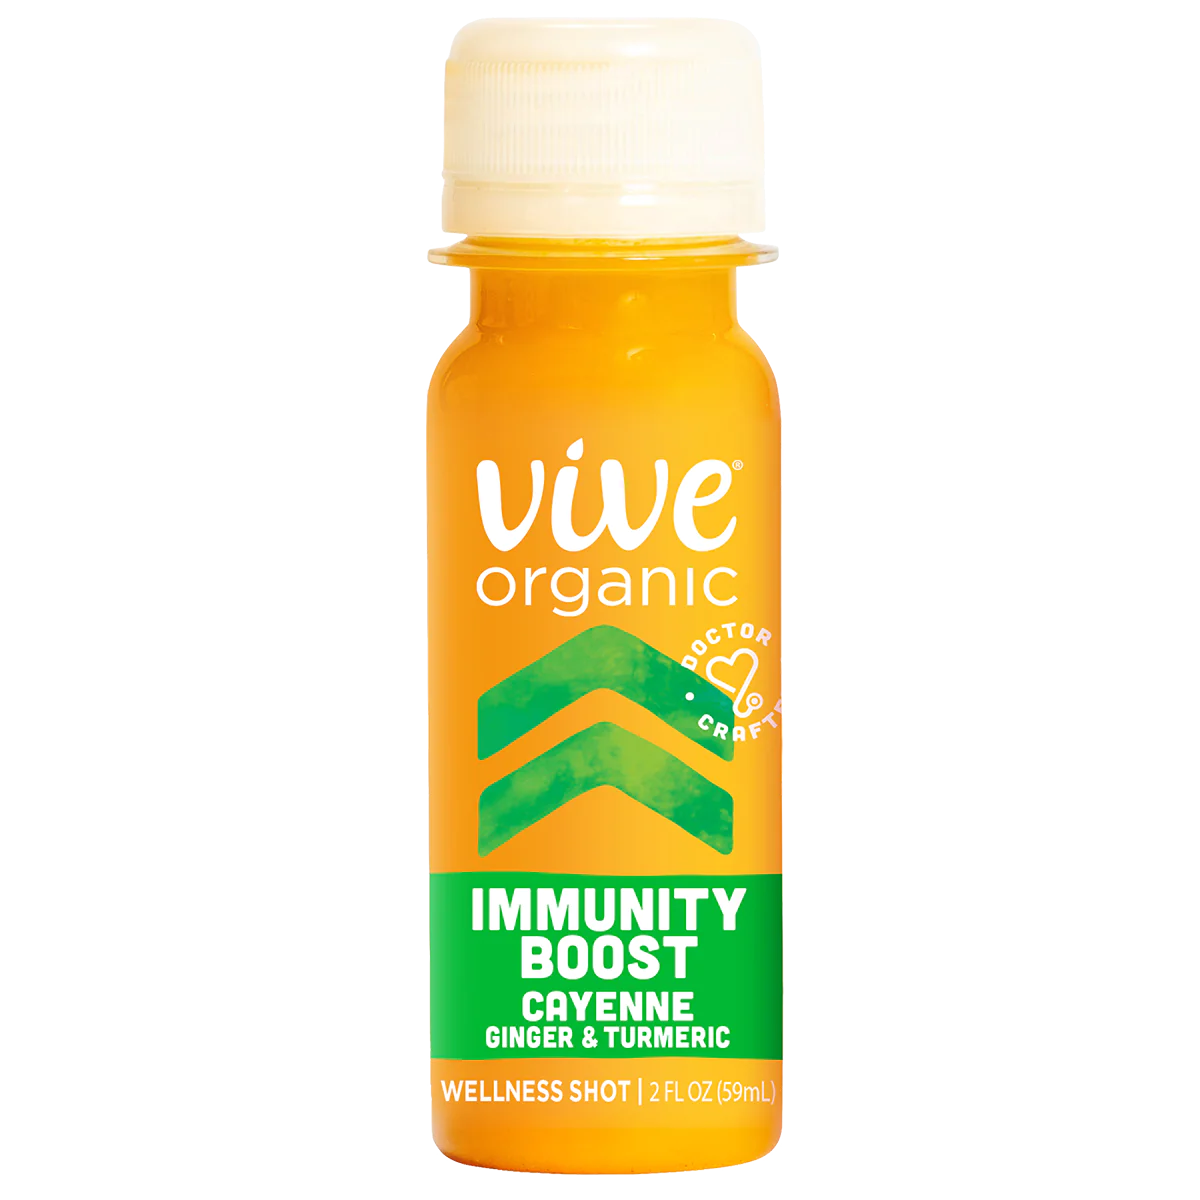 IMMUNITY BOOST CAYENNE SHOT Live Life Healthy The Herbal Way